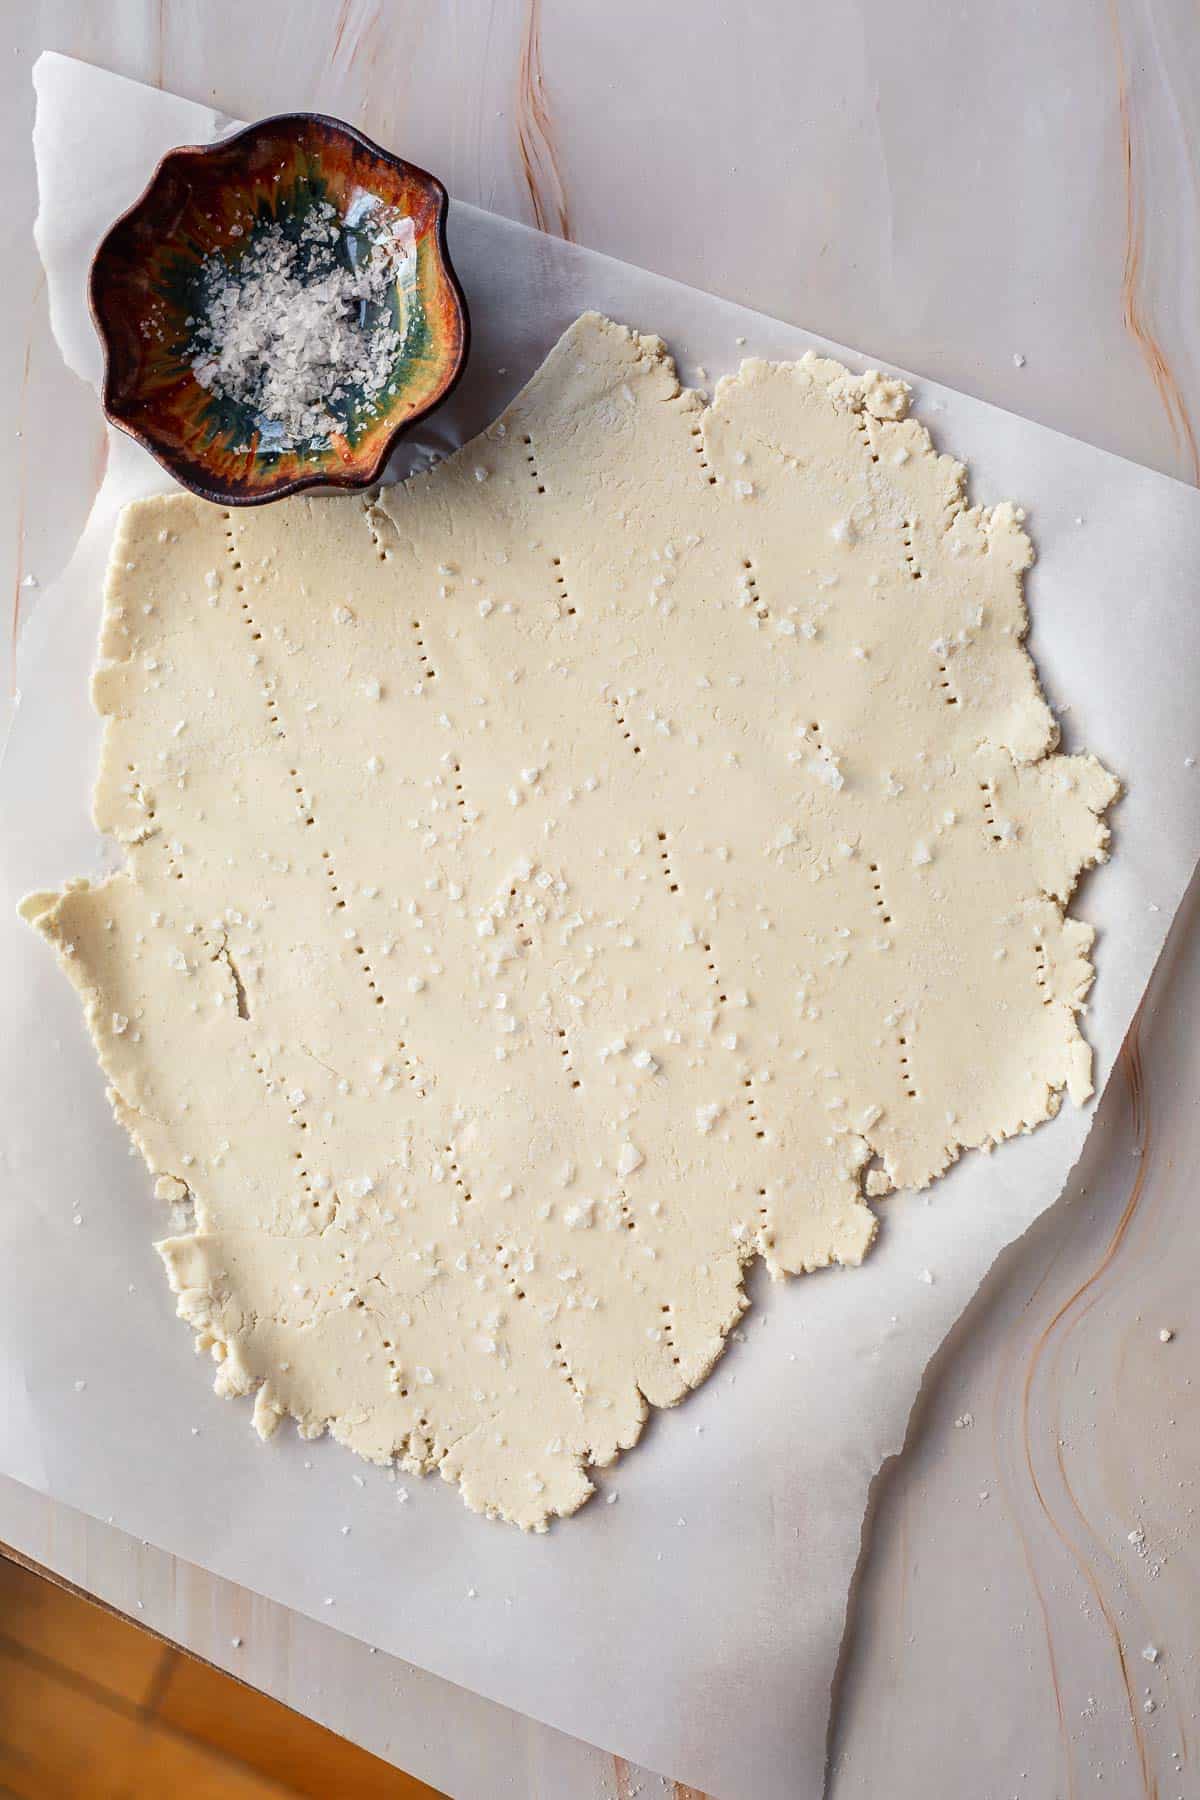 A batch of gluten-free matzo dough rolled out on parchment paper beside a small, colorful bowl filled with flour. The surface of the dough is textured with small indentations.